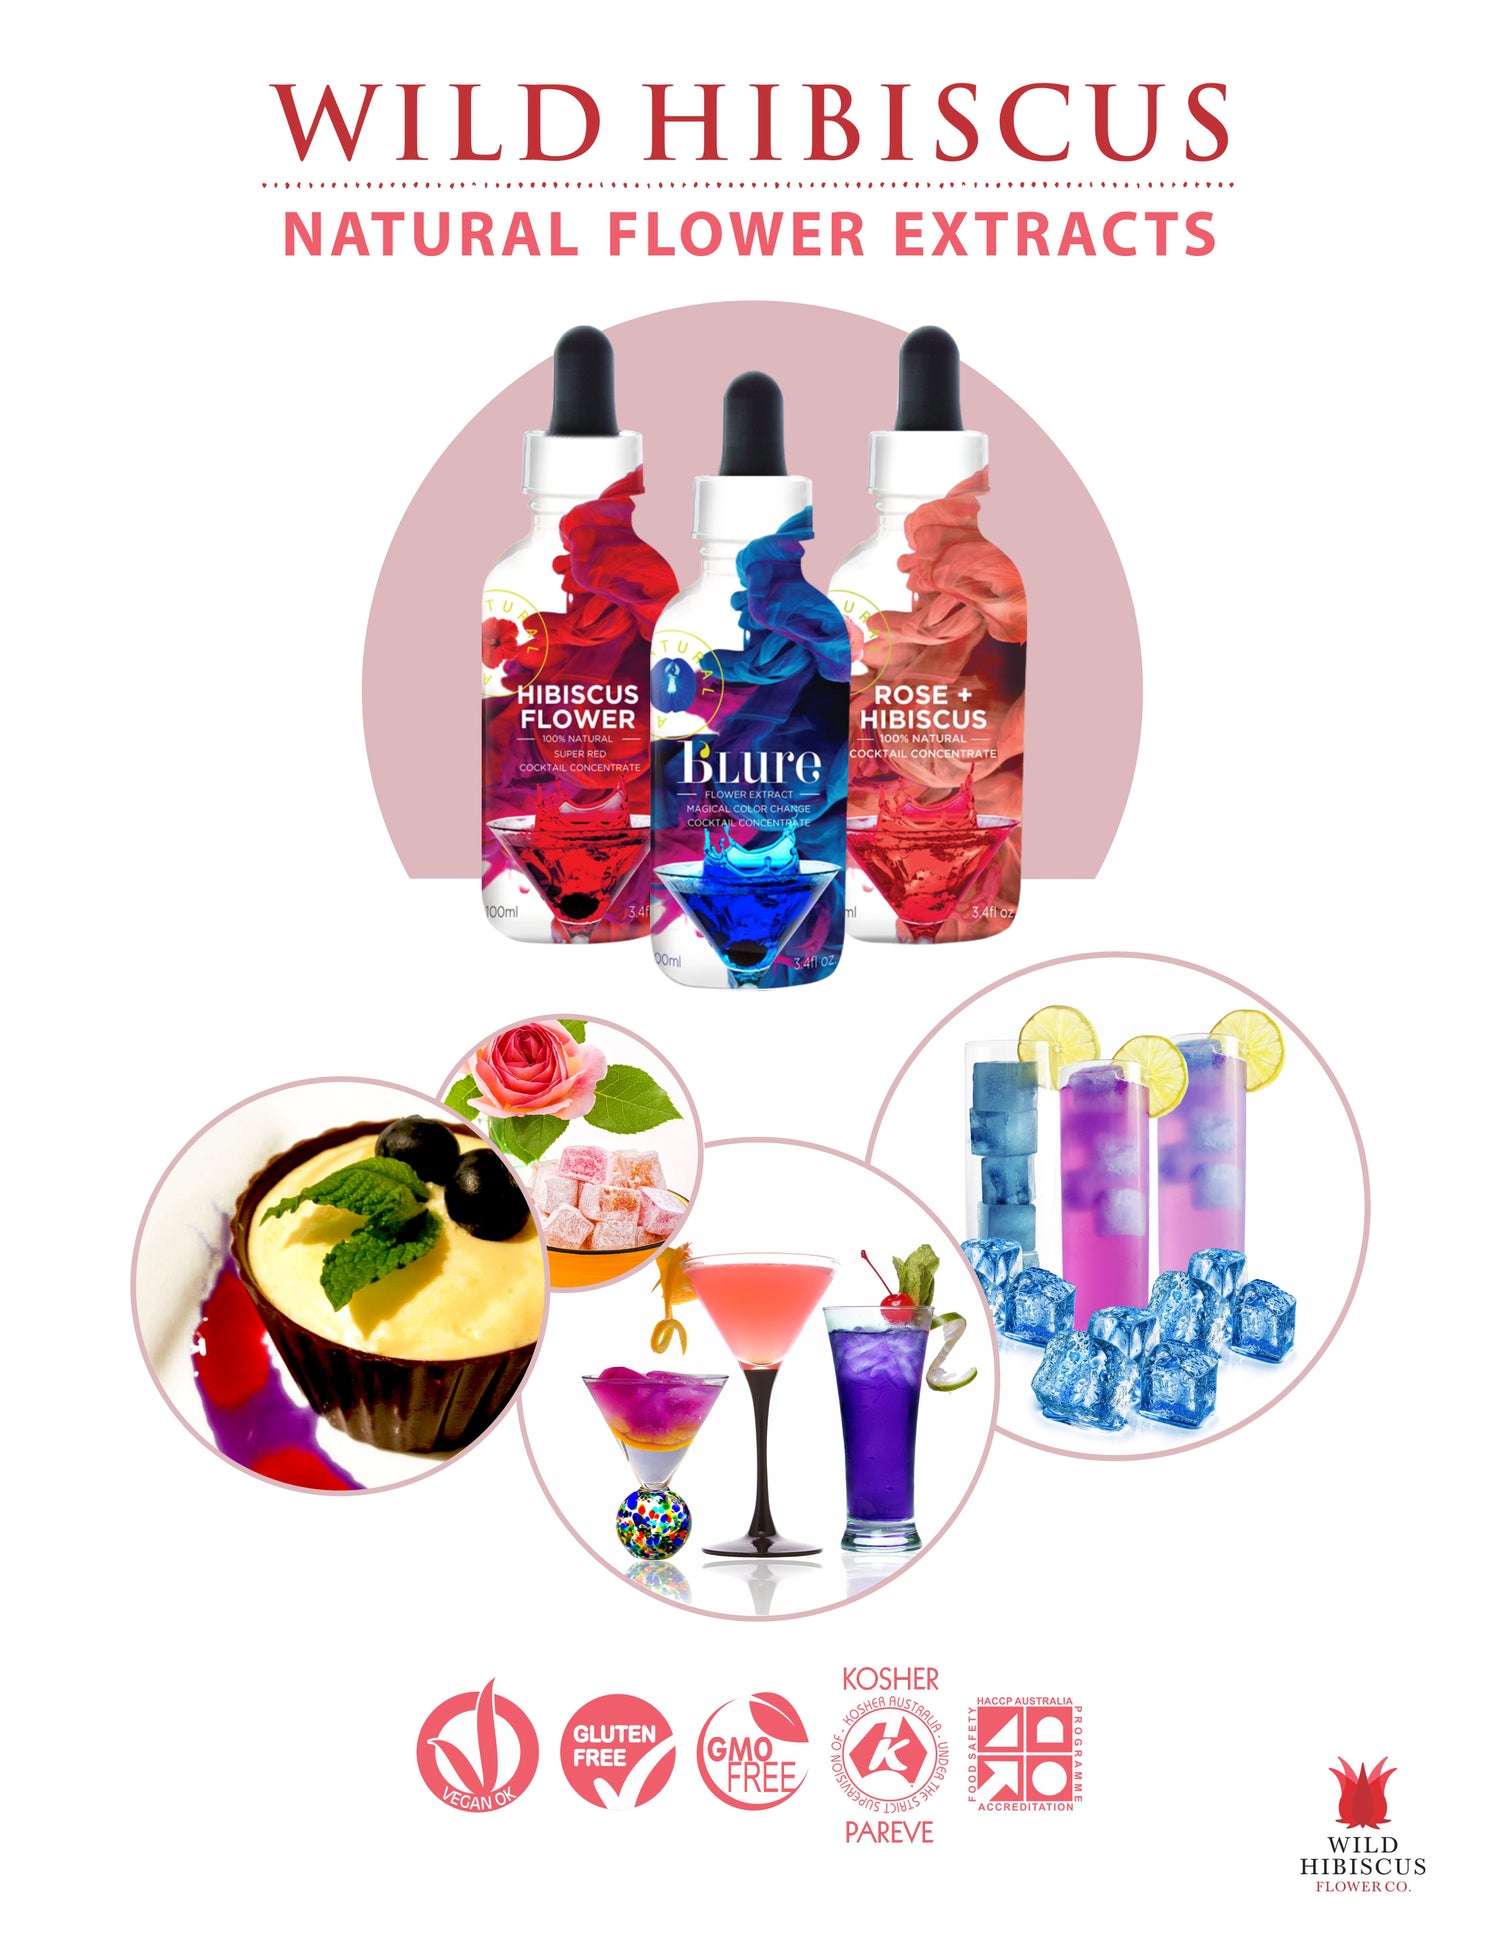 Wild Hibiscus, Rose & Hibiscus and b'Lure Butterfly Pea Flower